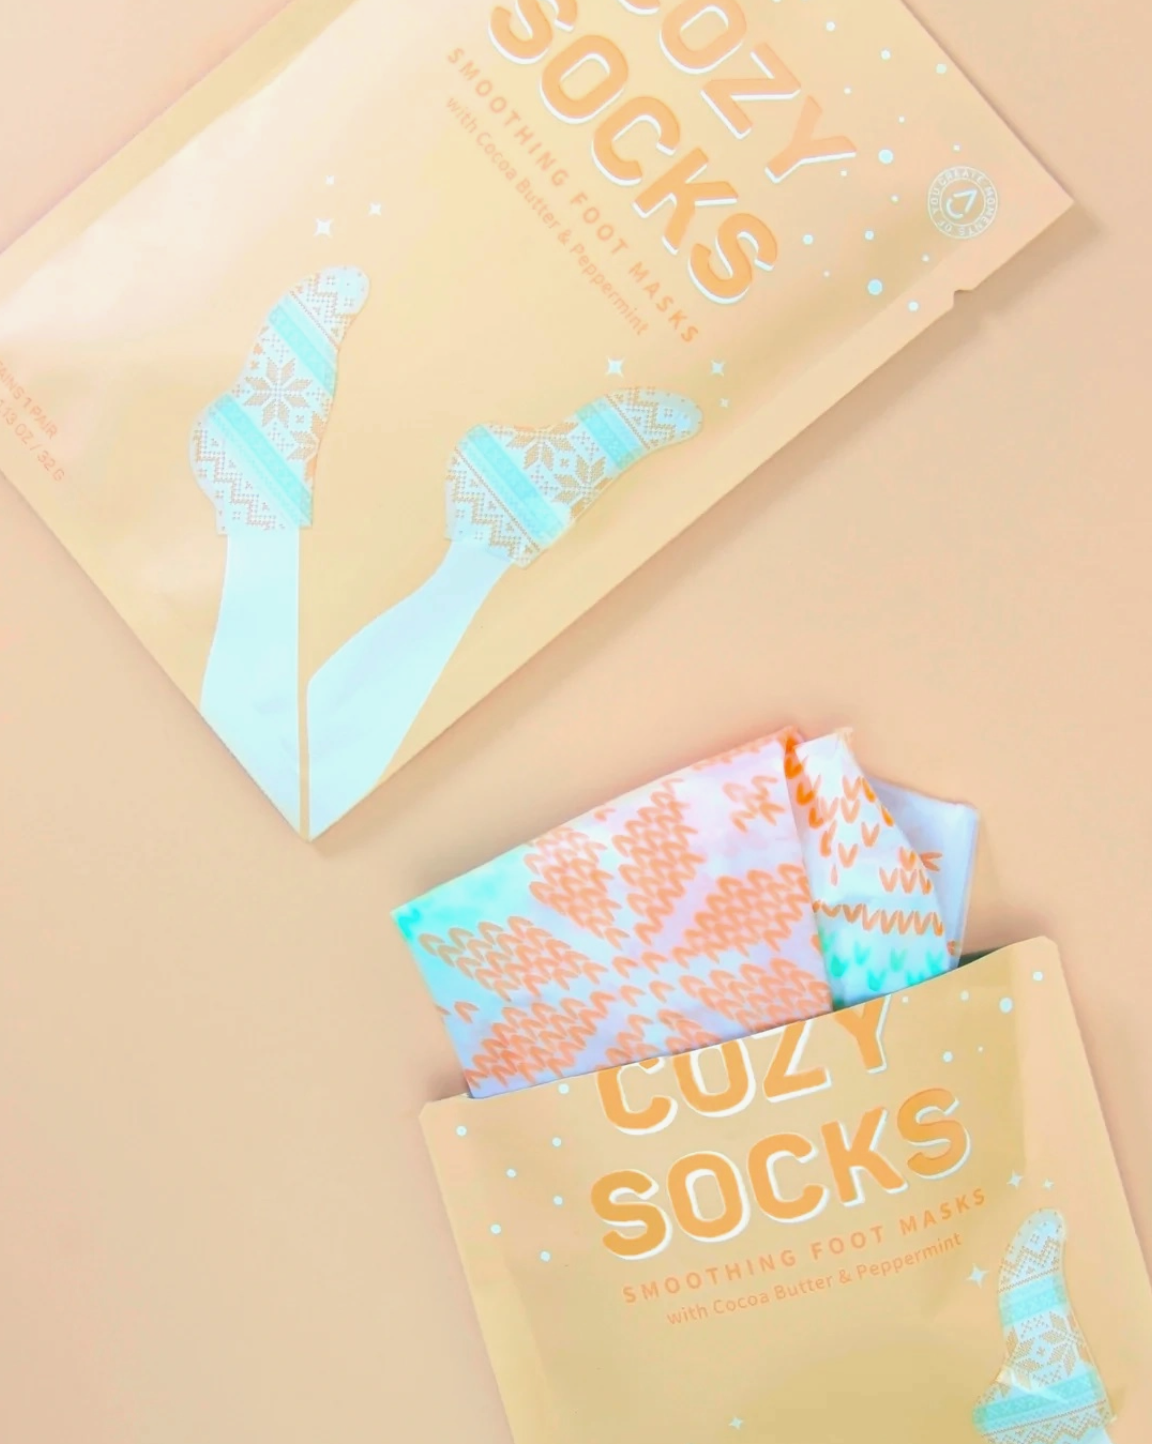 Cozy Socks Smoothing Foot Mask - 2 Pack